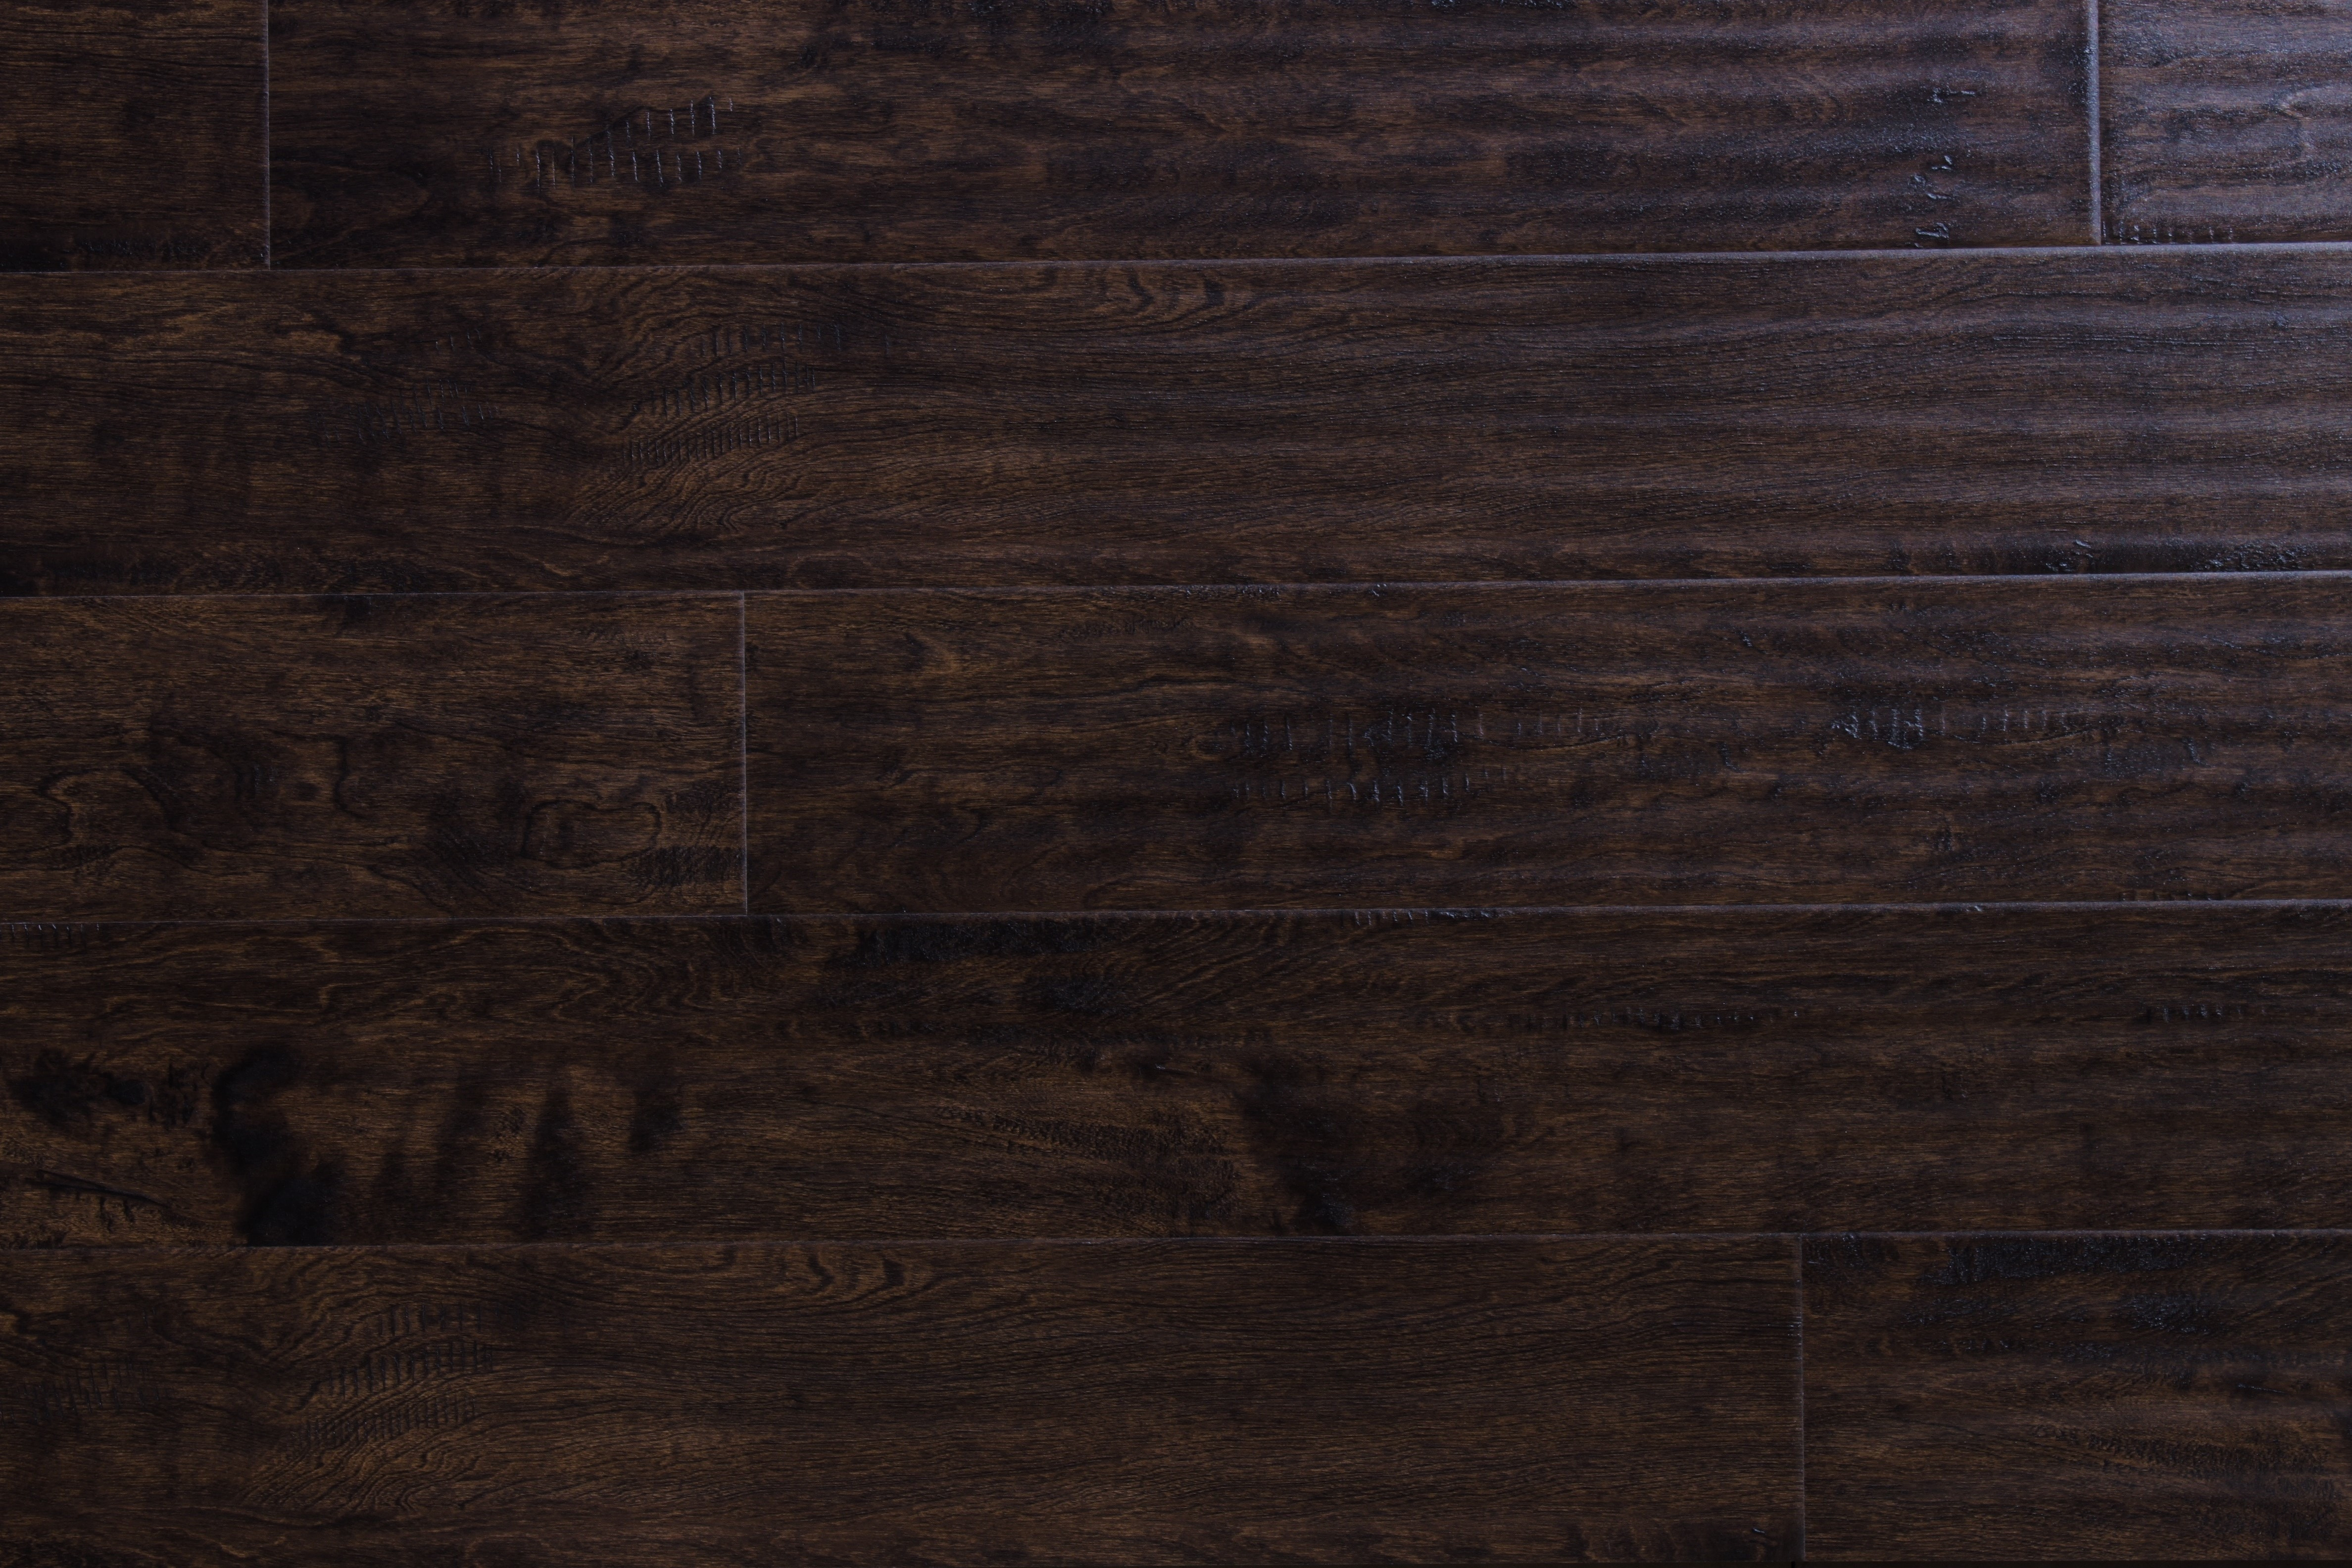 29 Great Rustic Hand Scraped Hardwood Flooring 2024 free download rustic hand scraped hardwood flooring of wood flooring free samples available at builddirecta with tailor multi gb 5874277bb8d3c